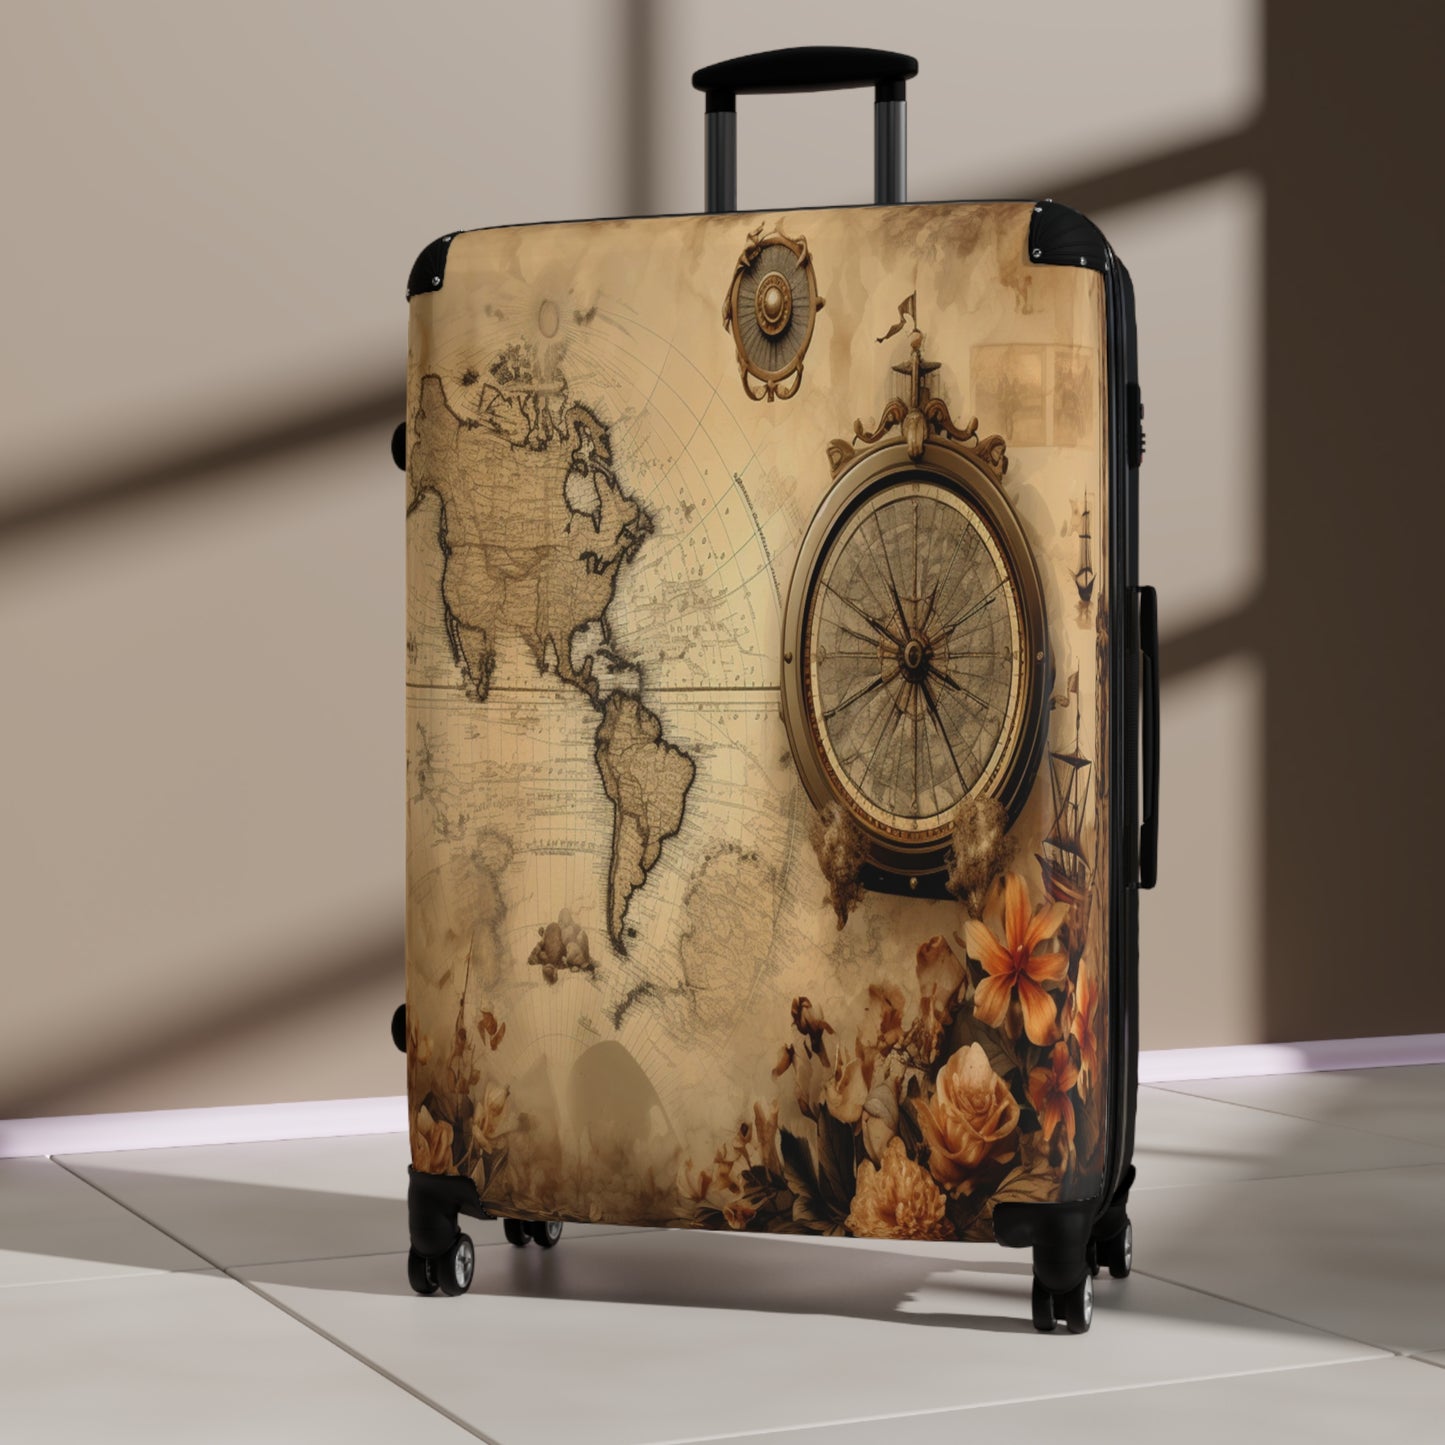 Victorian Voyager Luggage | Explorer's Legacy Collection | Christmas vacation | Travel Luggage | Suitcase | Vintage Map